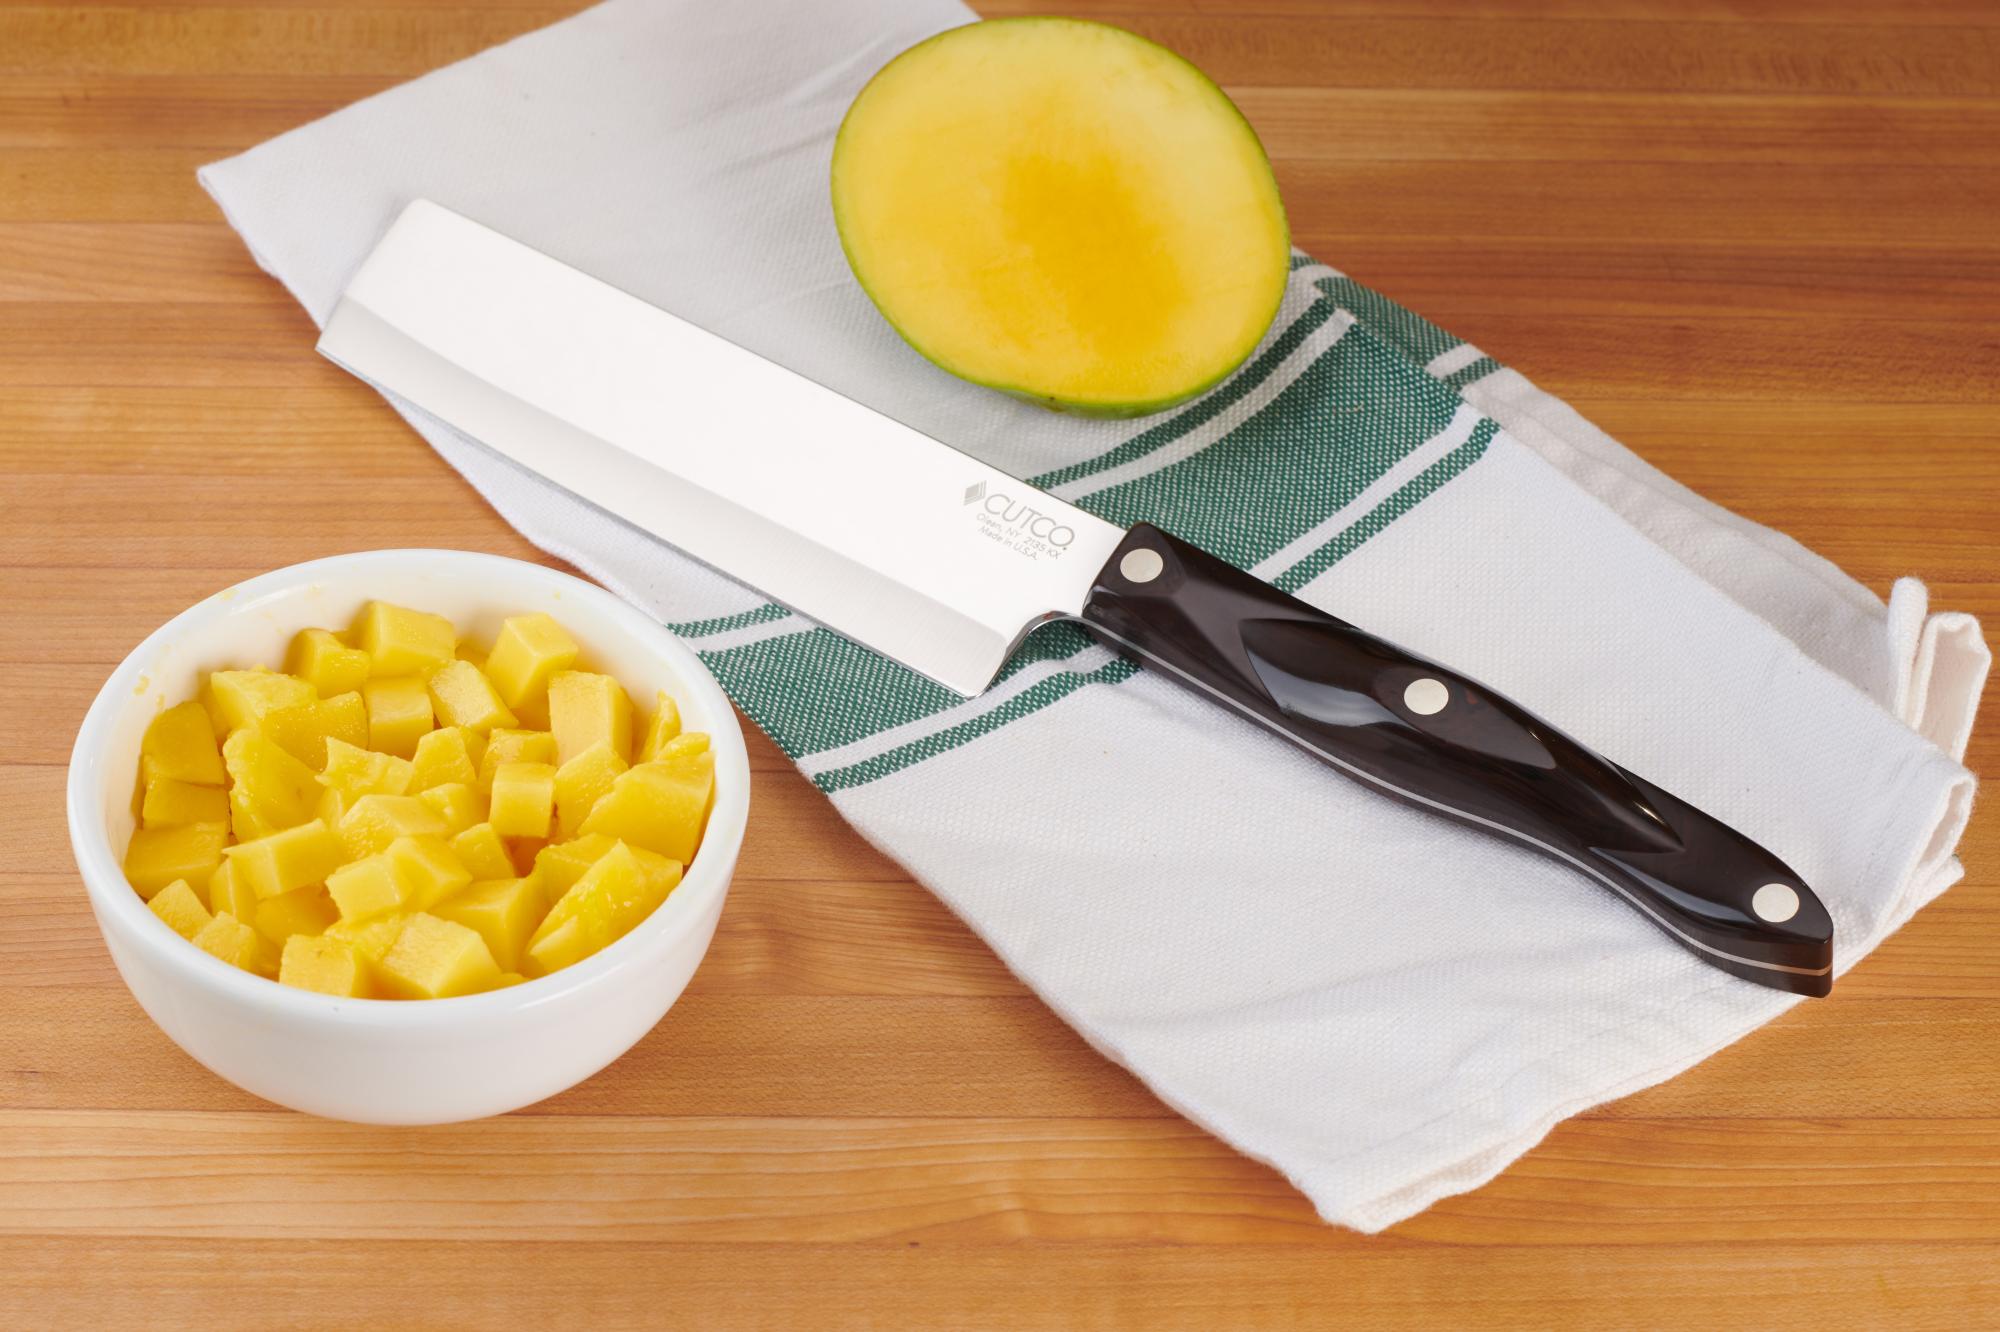 Cutting the mango with a 6 Inch Vegetable Knife.